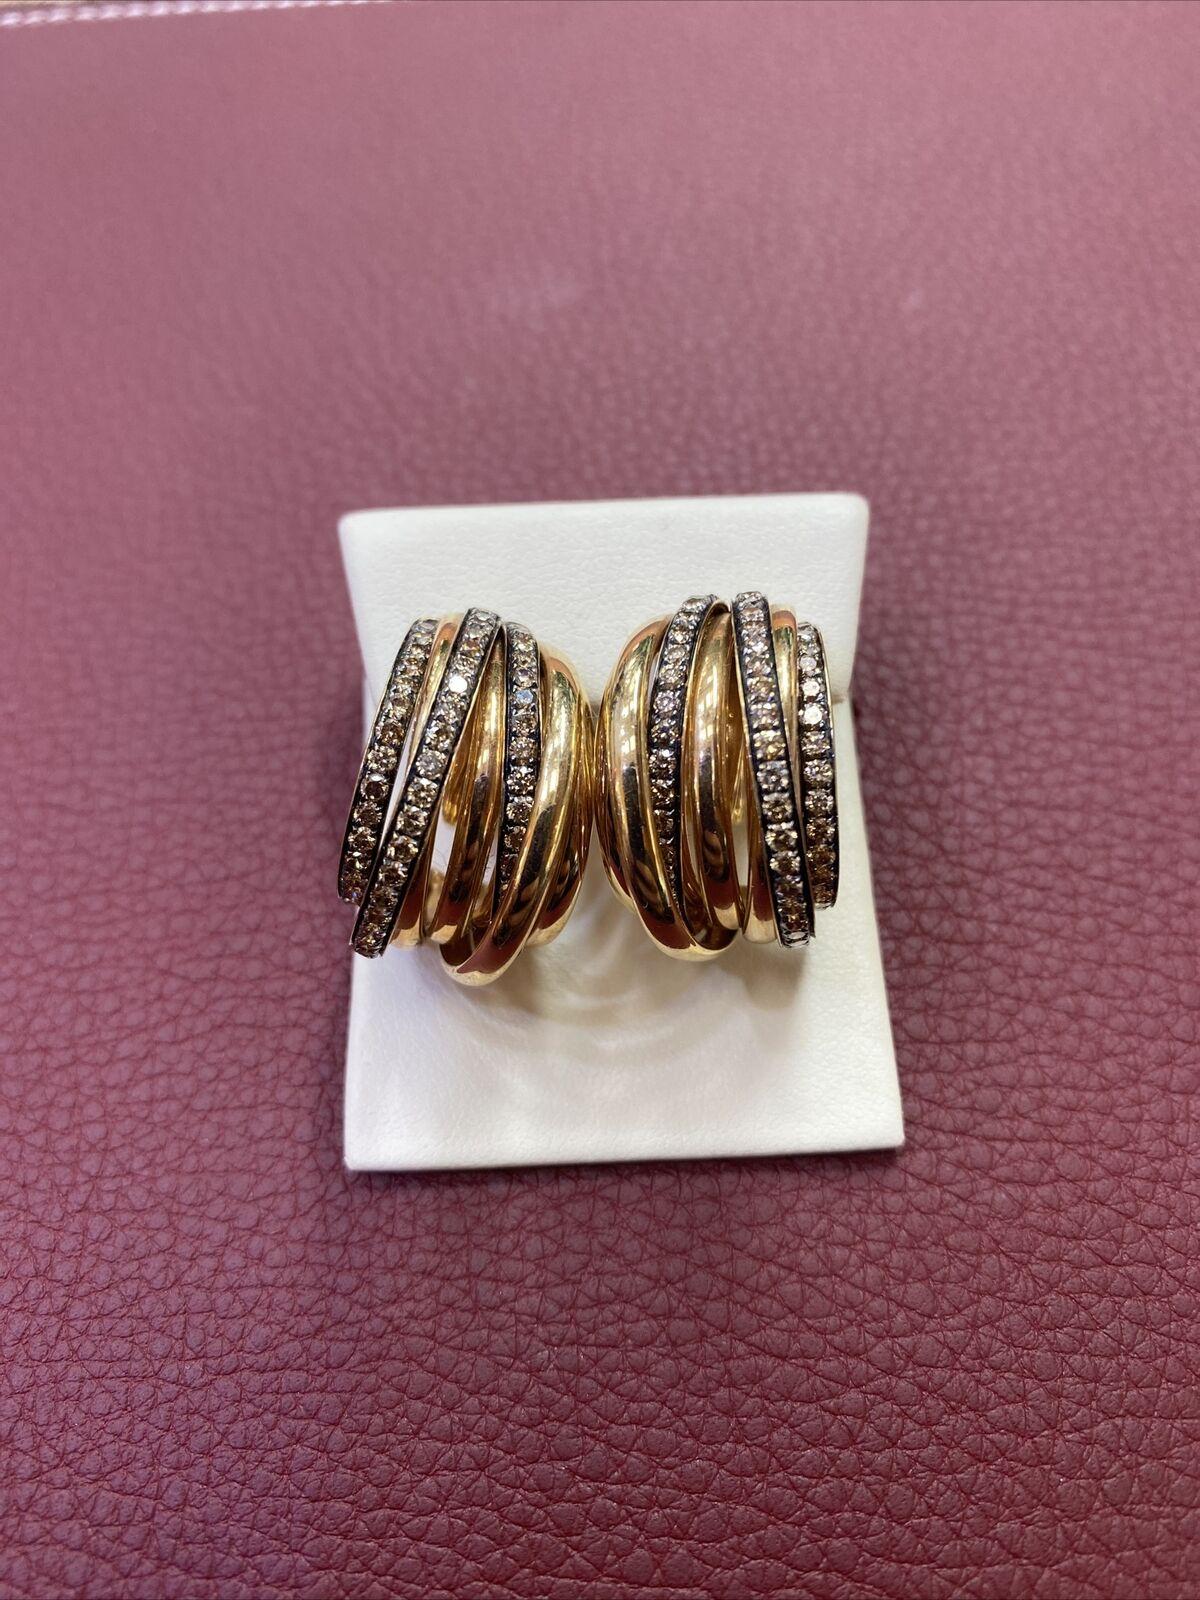 De Grisogono Allegra 18k Rose Gold Brown Diamond Earrings W/ COA


Retail for these $21,000


Comes with de GRISIGONO Certificate if Authenticity


Reference 14001/16